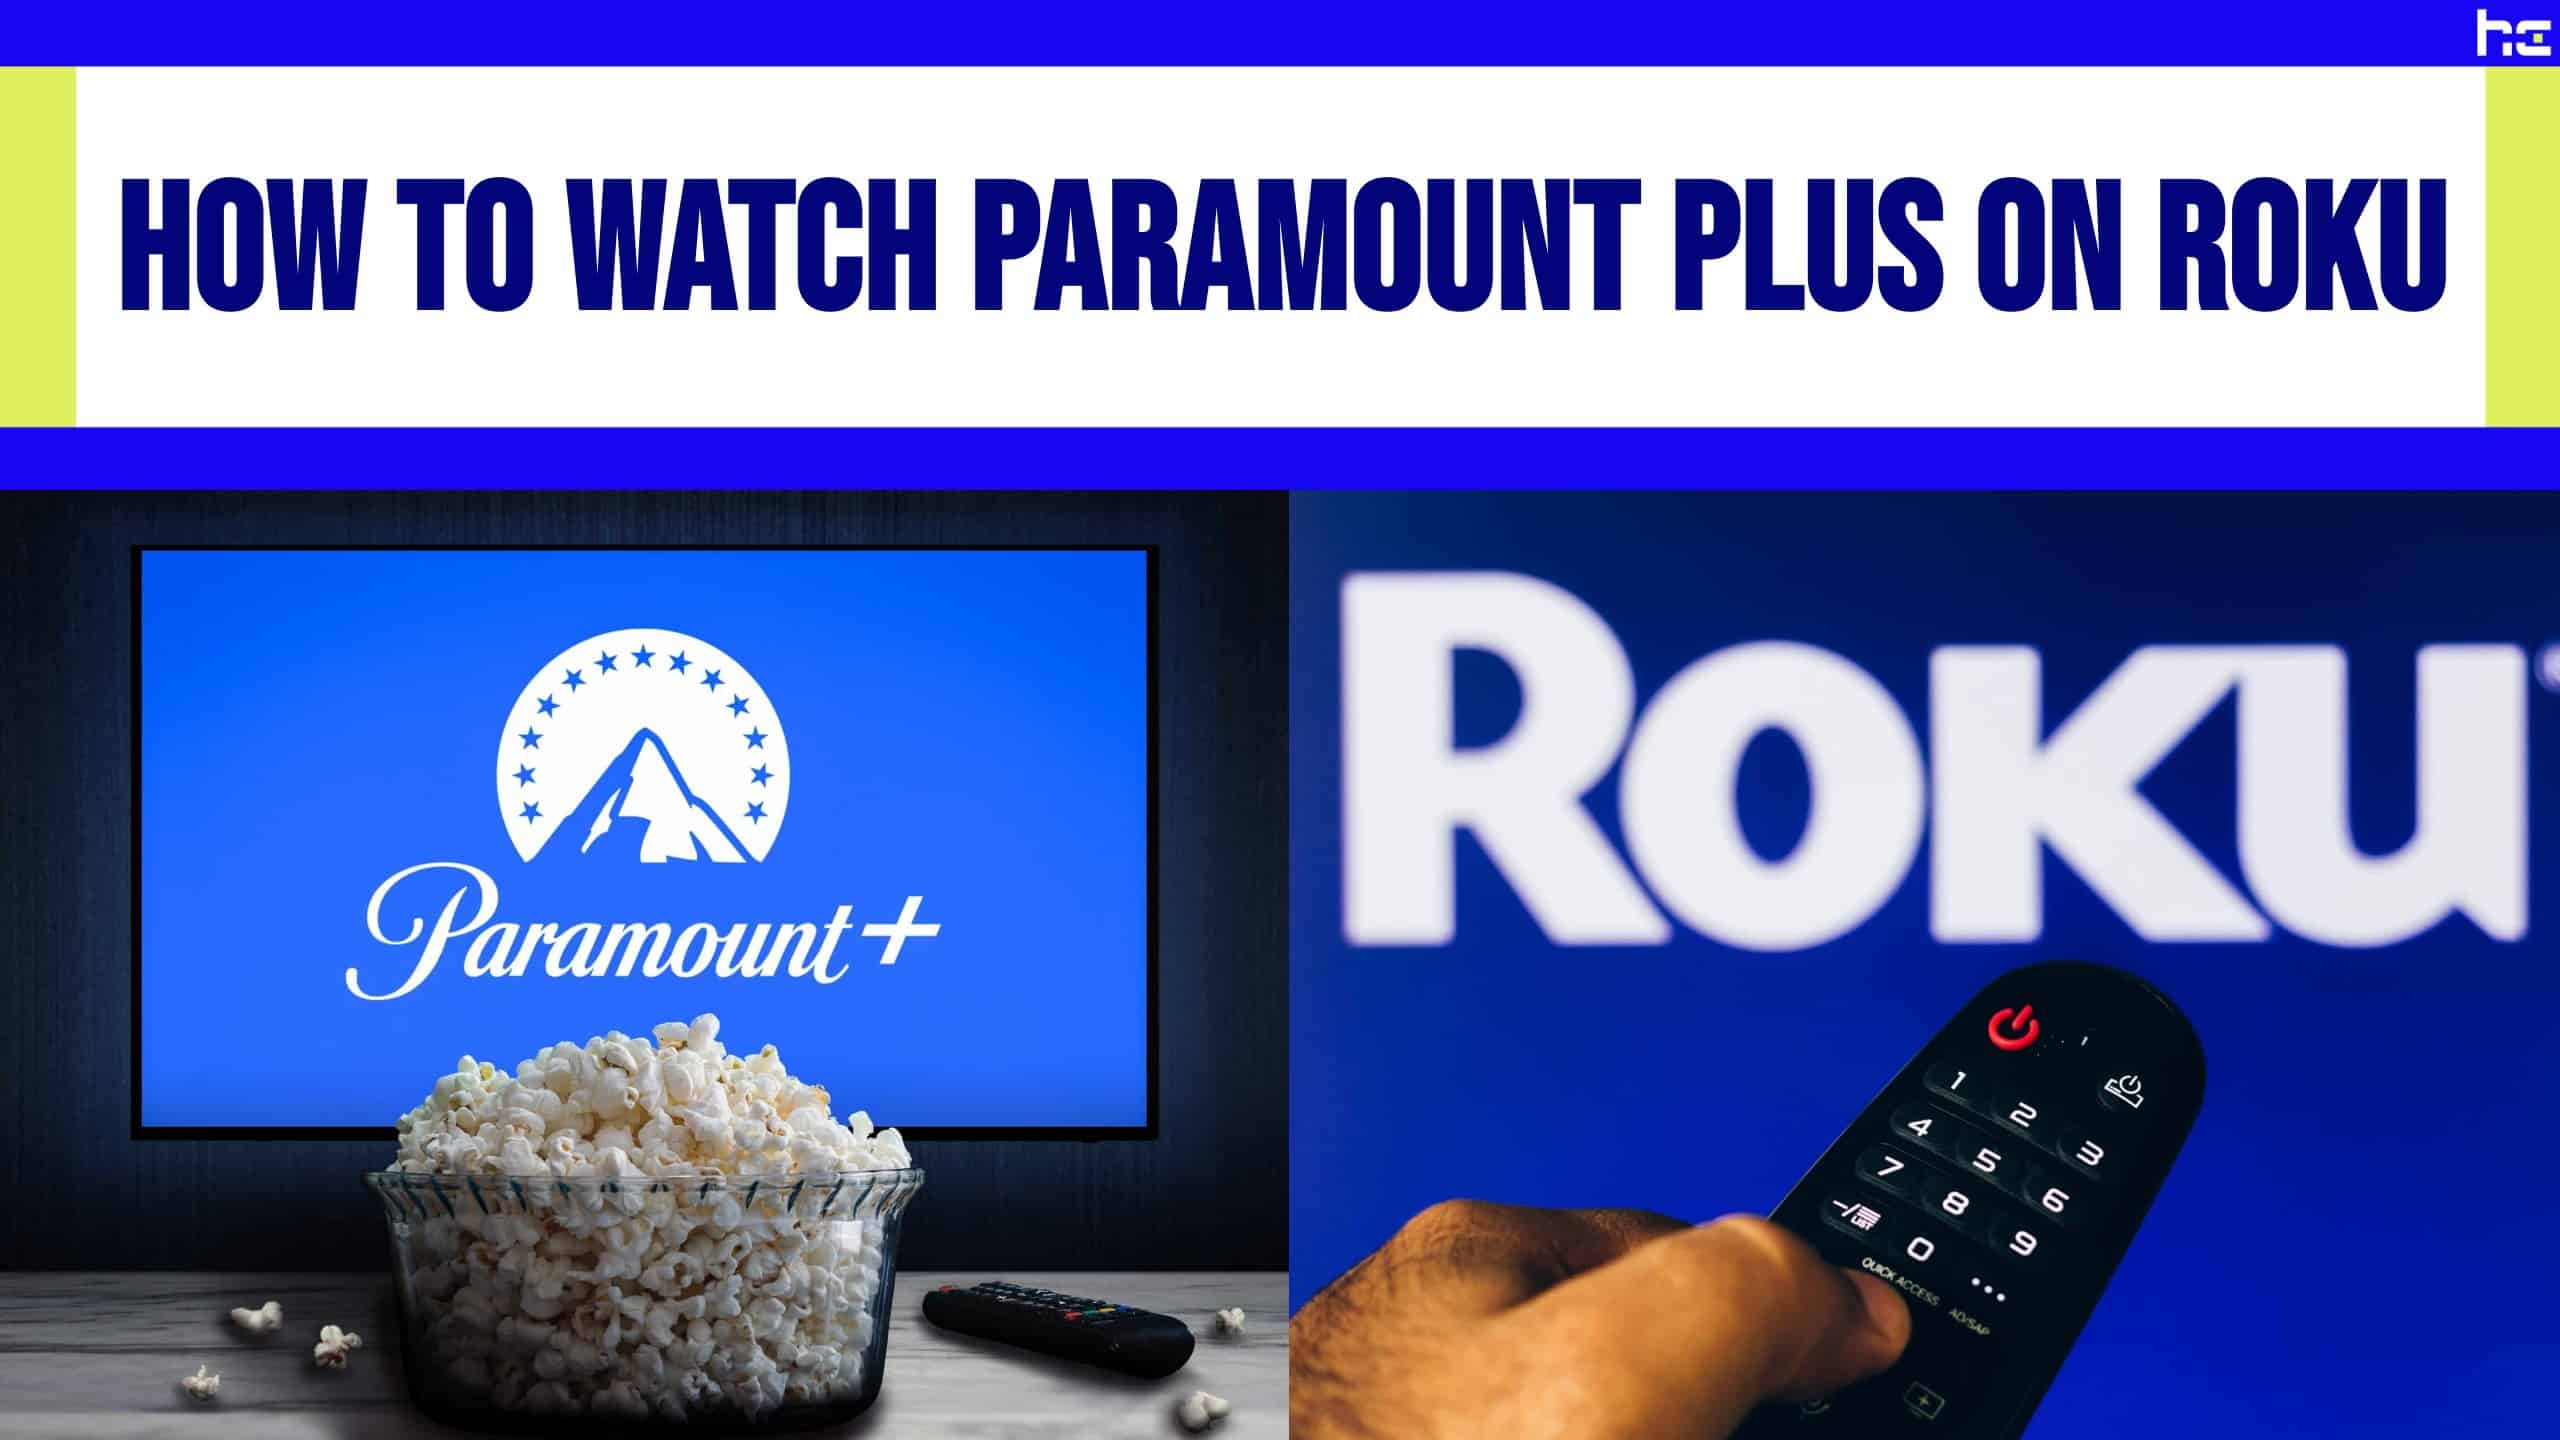 How to Watch Paramount Plus on Roku